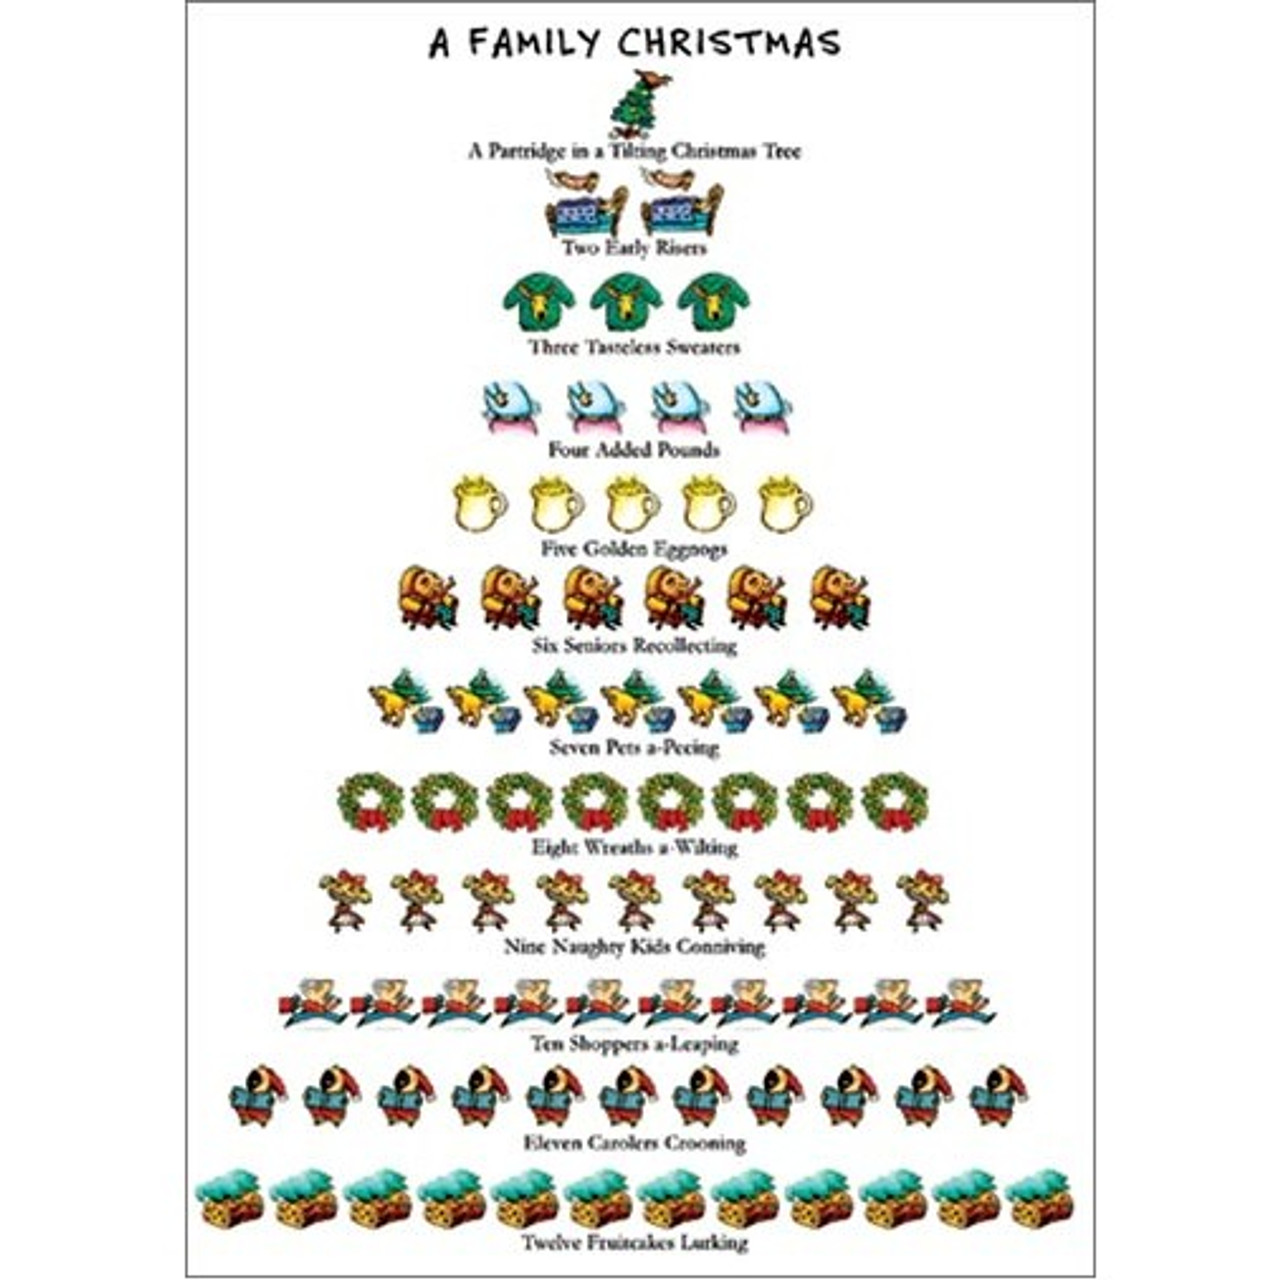 12 Days of Christmas Playing Cards - Flanders Family Home Life